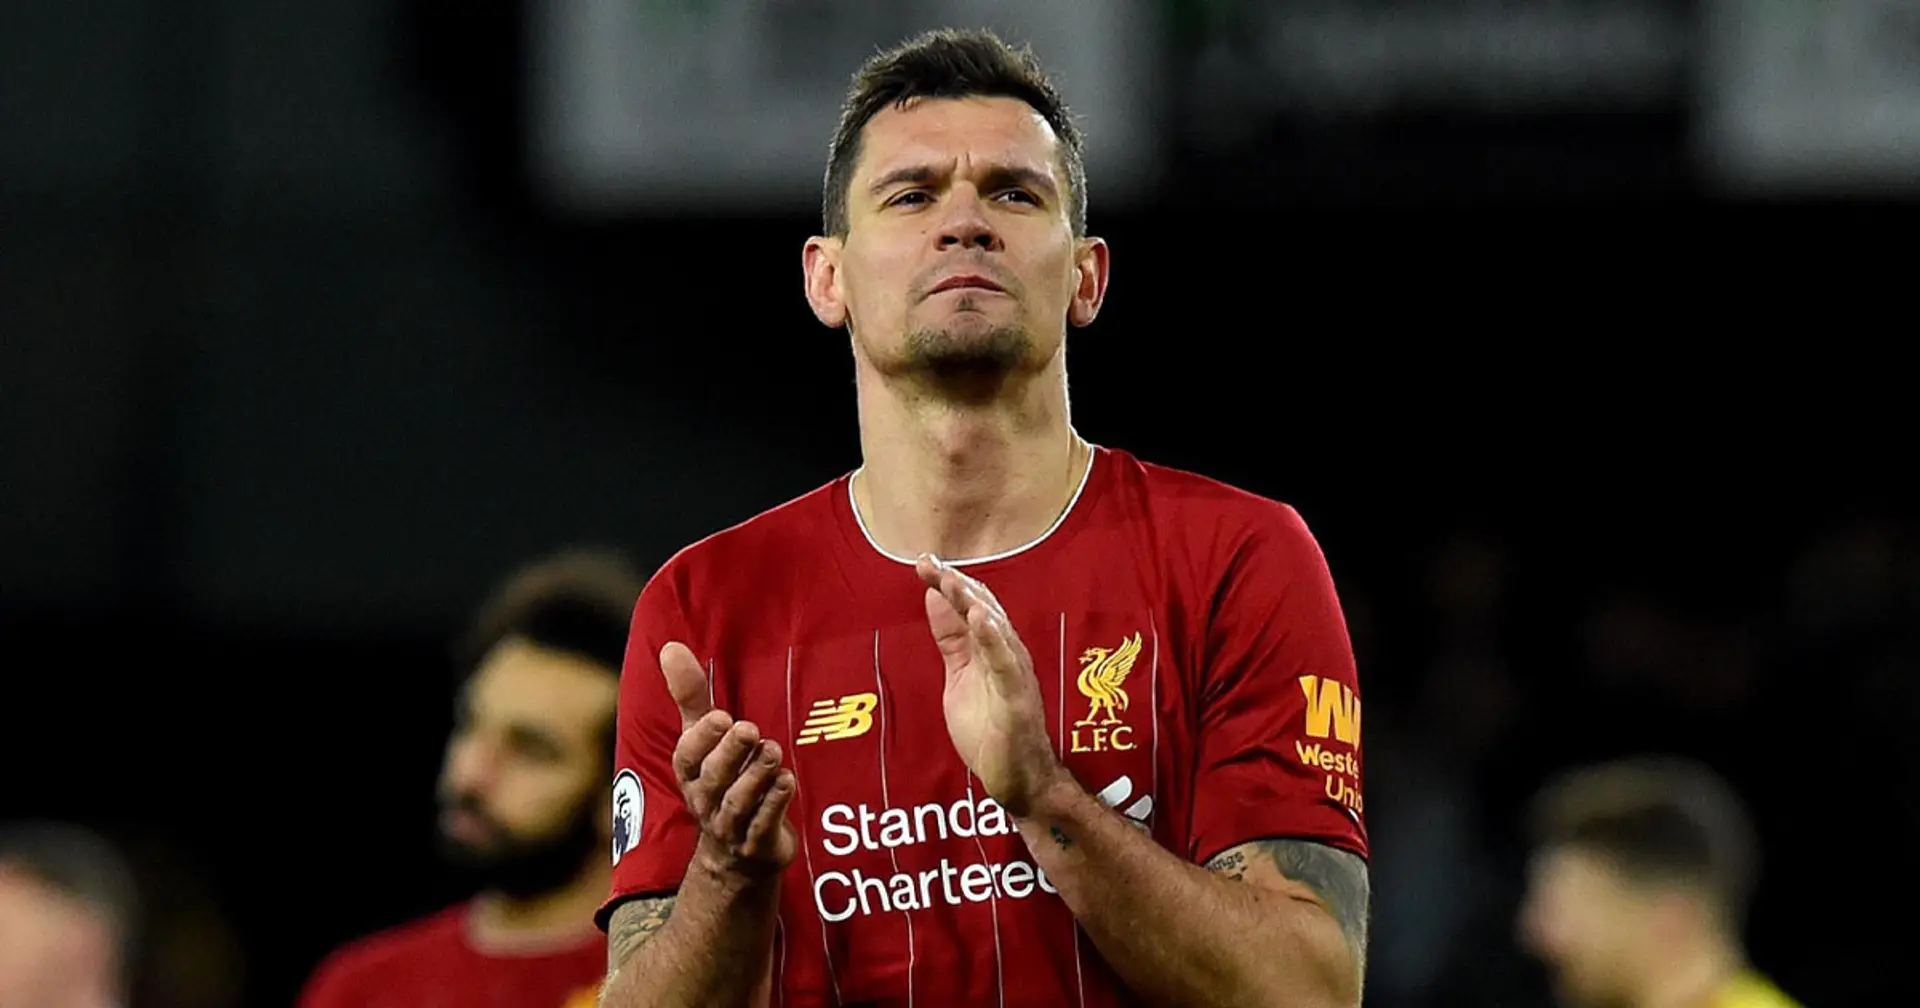 Liverpool plan to extend Lovren's contract but still looking to sell him